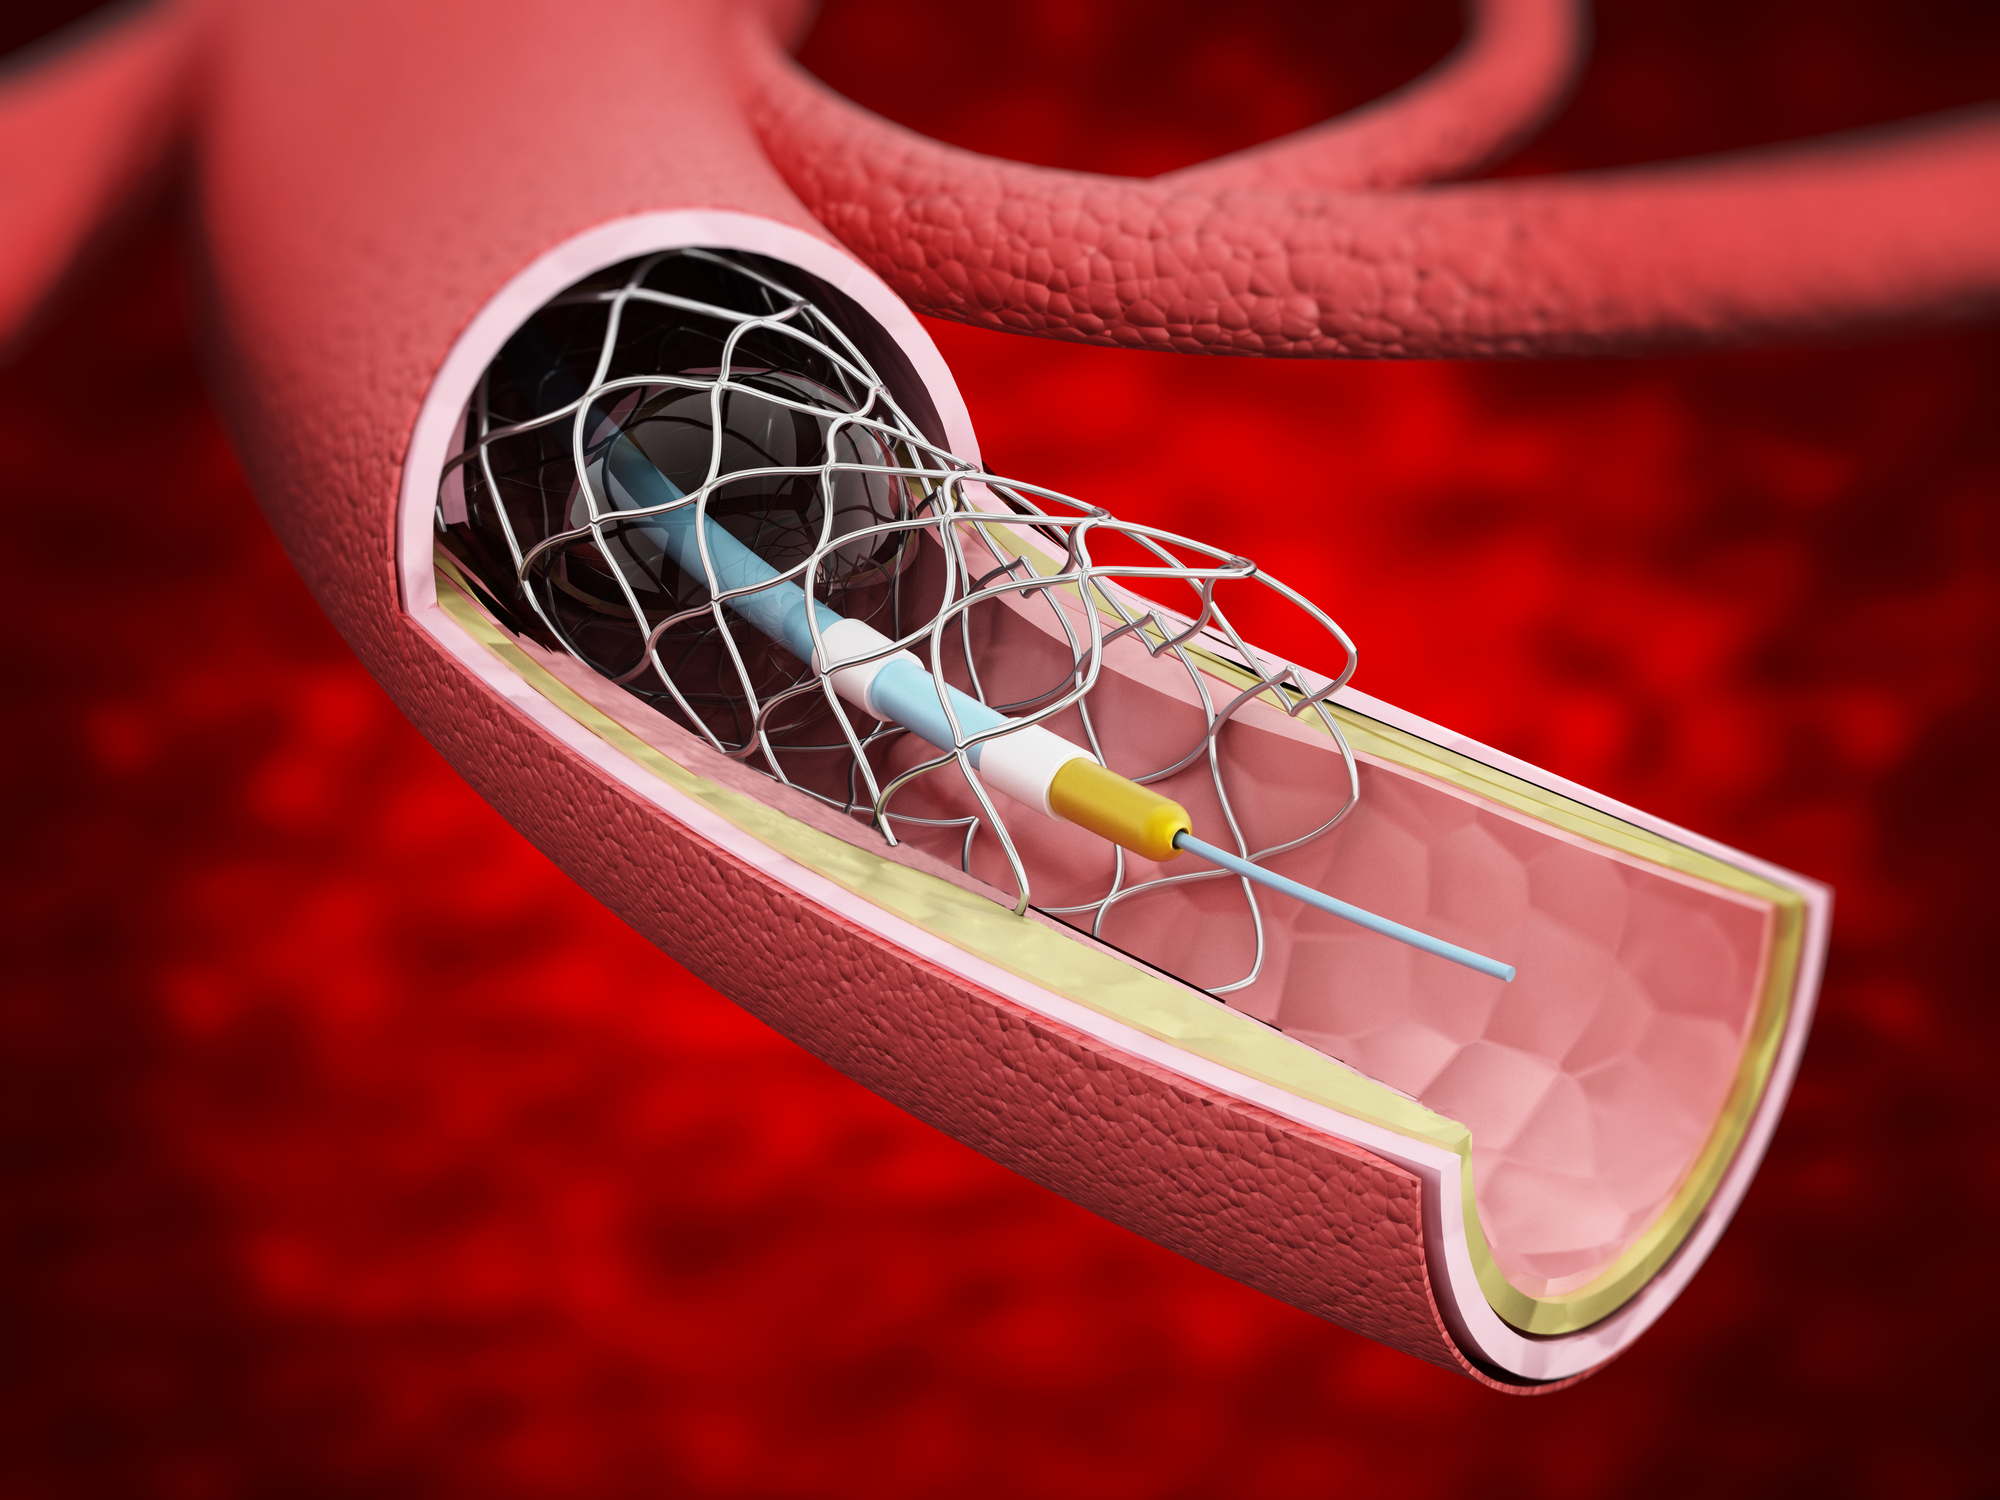 Illustration of a stent being expanded in an artery